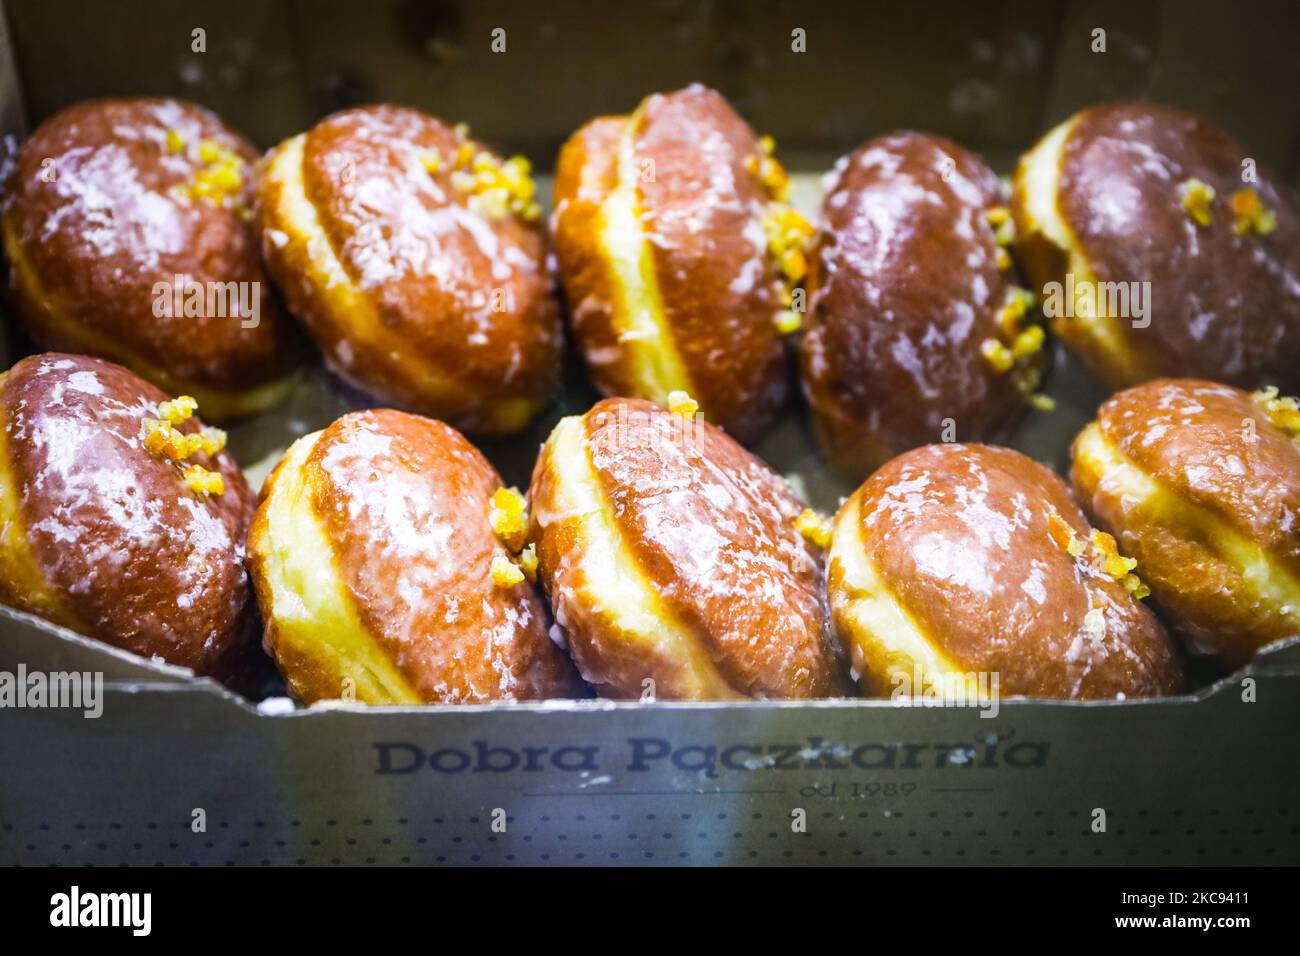 Bakery 'Dobra Paczkarnia' sales donuts for Fat Thursday. Krakow, Poland on February 11, 2021. Fat Thursday is a traditional Catholic Christian feast on the last Thursday before Lent. It symbolizes the celebration of Carnival. The most popular dish served on that day in Poland are 'paczki' - fist-sized donuts filled with marmalade. (Photo by Beata Zawrzel/NurPhoto) Stock Photo